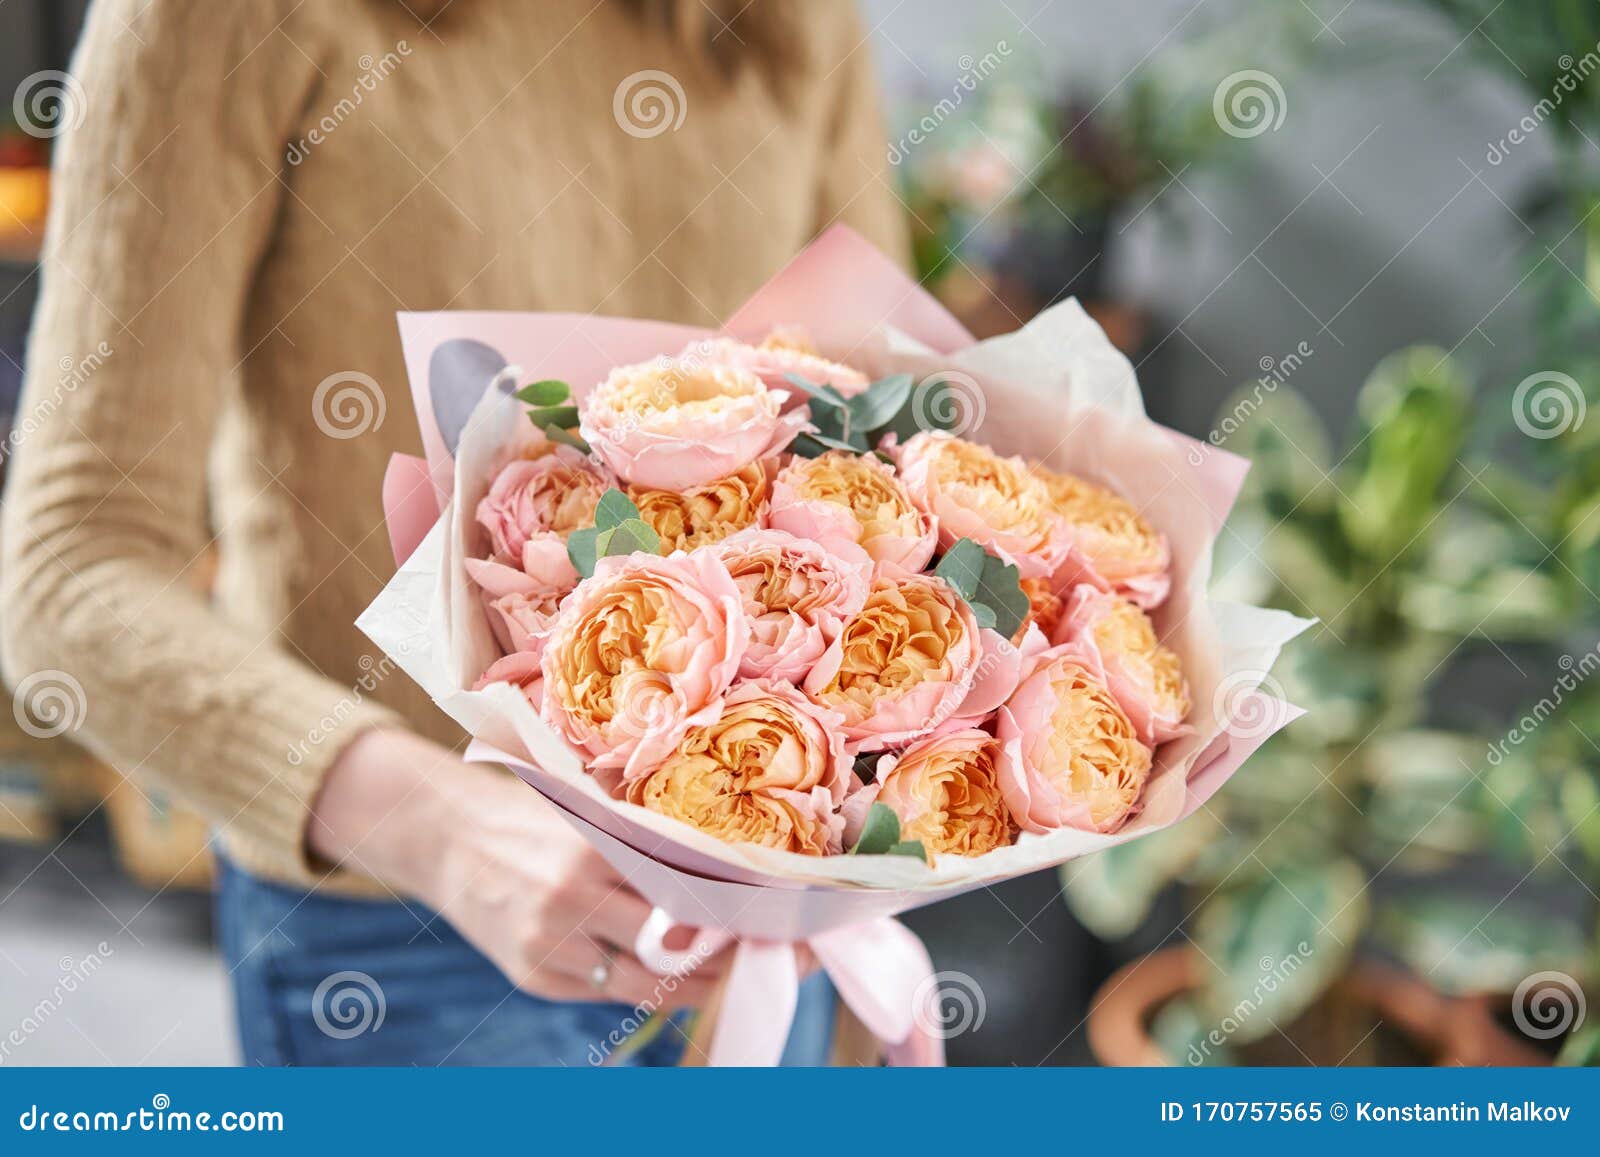 Roses of Peach Color. Beautiful Bouquet of Mixed Flowers in Womans Hands  Stock Image - Image of gift, flower: 170757565